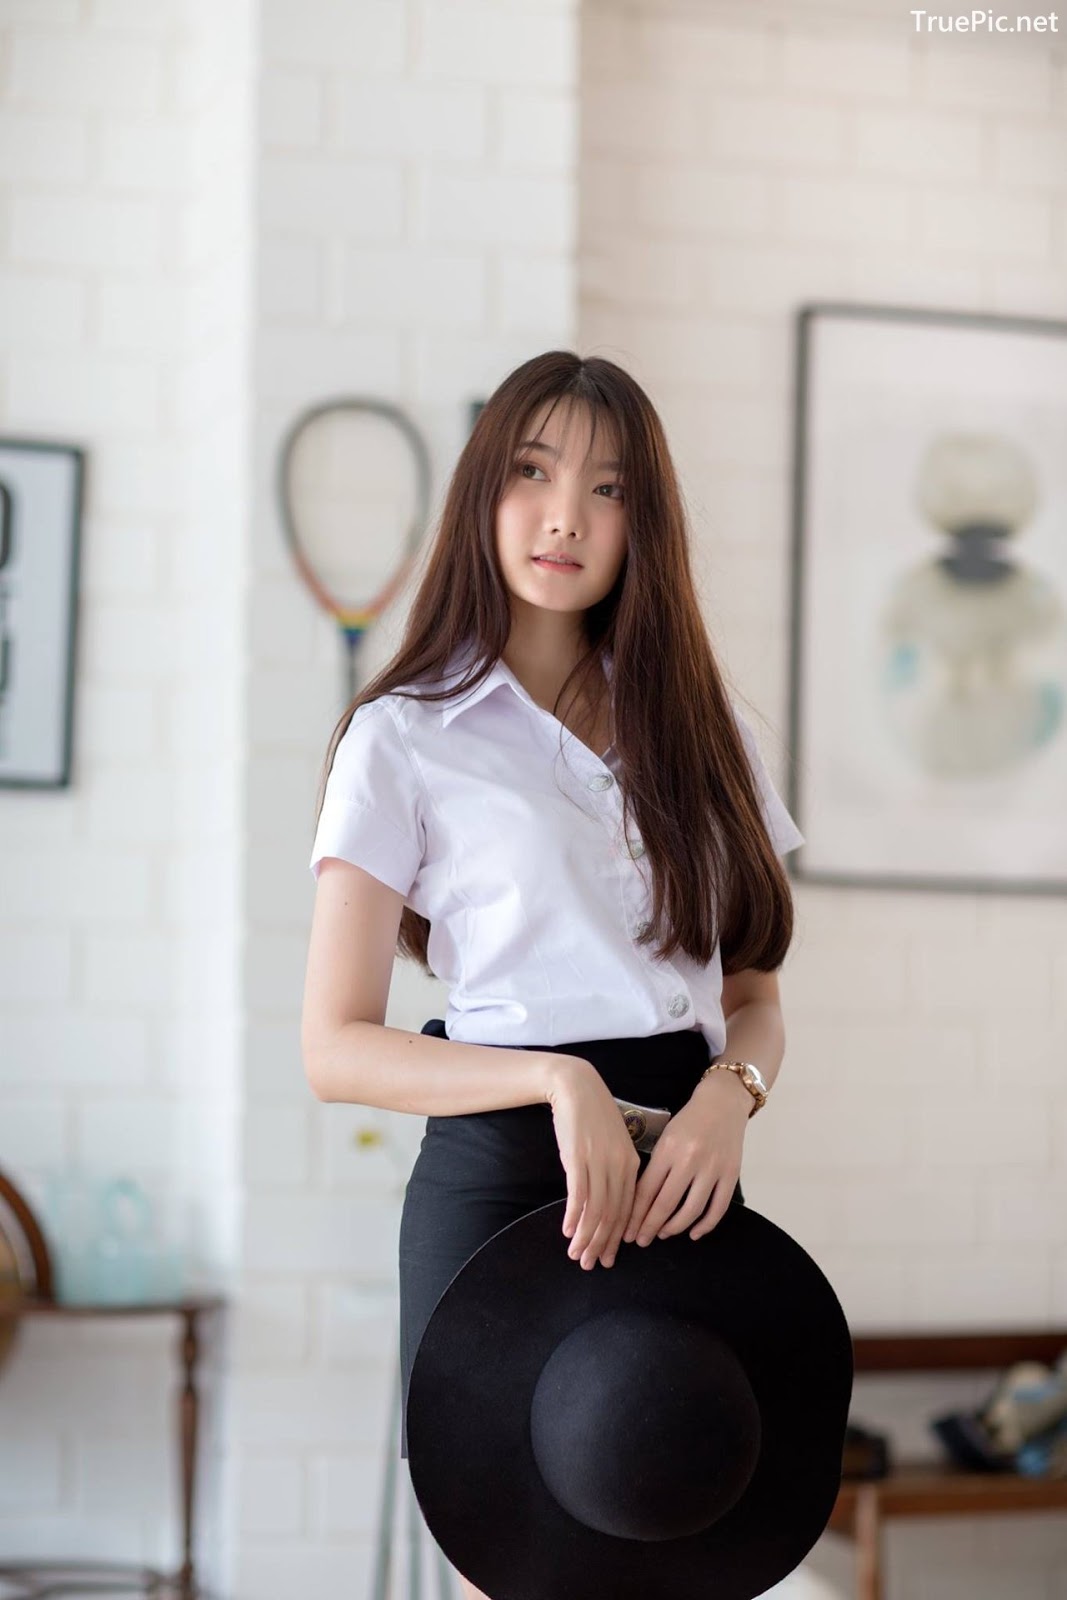 Image-Thailand-Cute-Model-Creammy-Chanama-Concept-Innocent-Student-Girl-TruePic.net- Picture-22